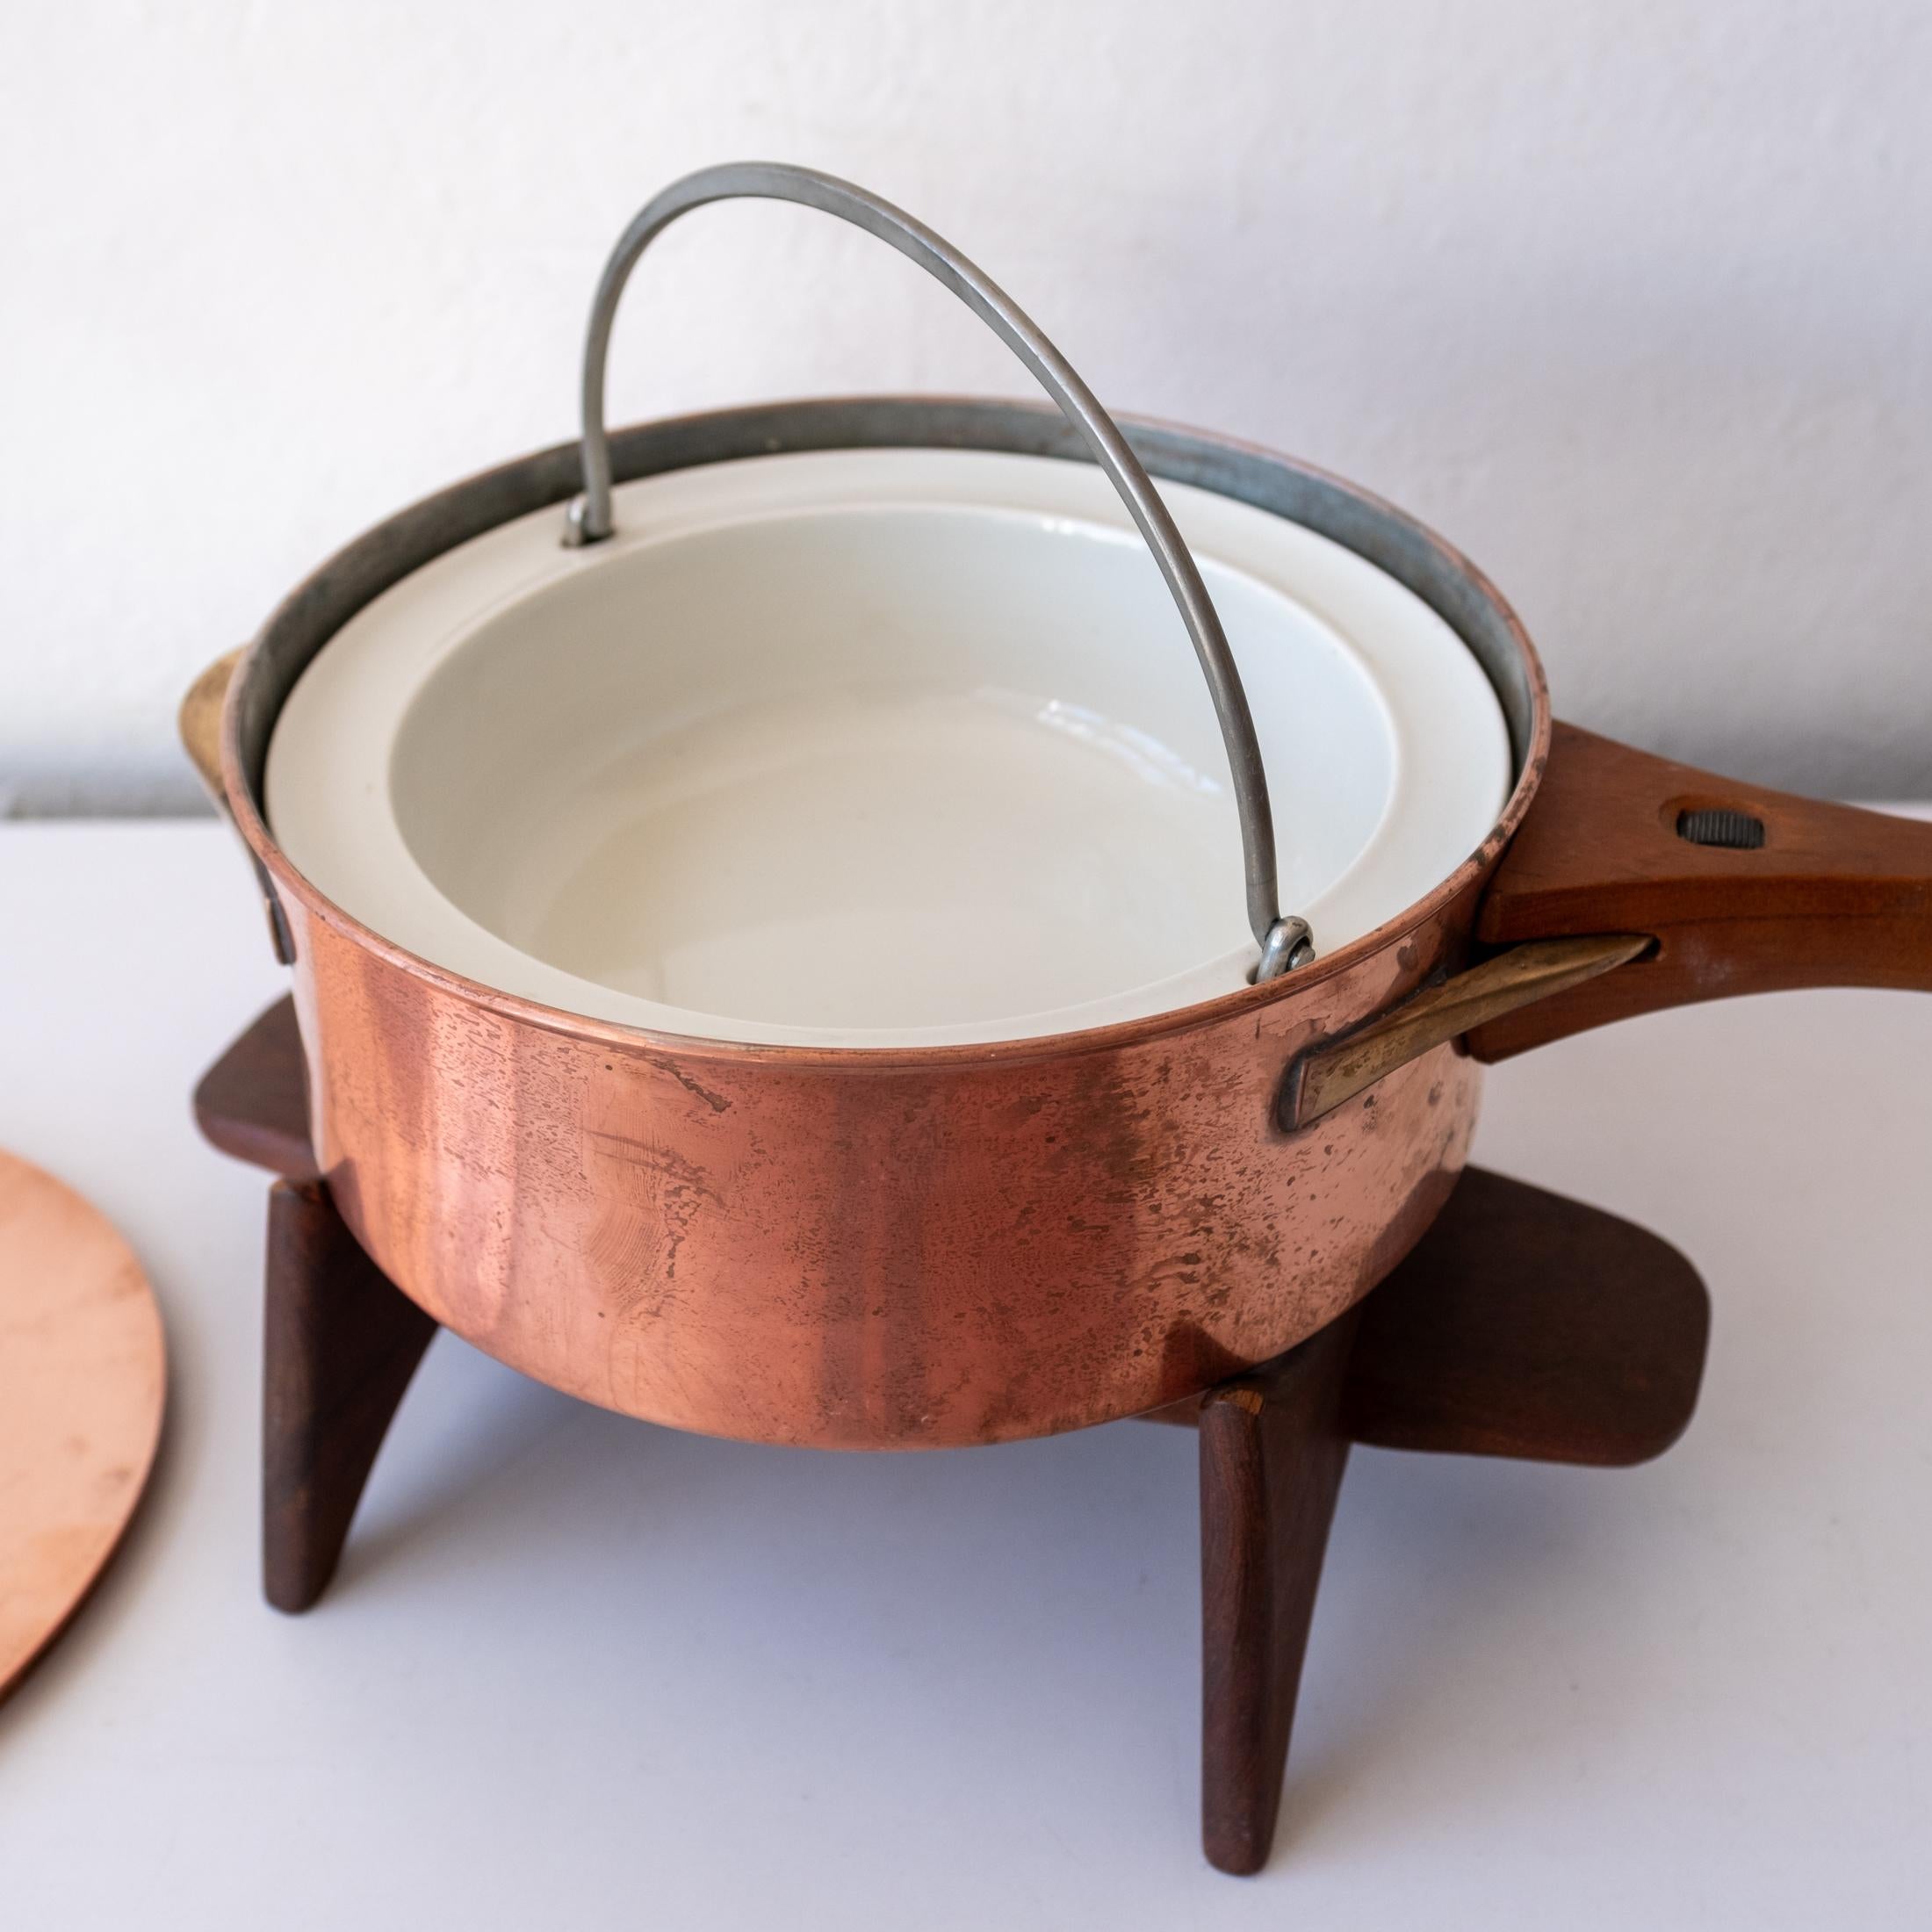 20th Century Rare Copper Pan and Stand by Jens Quistgaard for Dansk